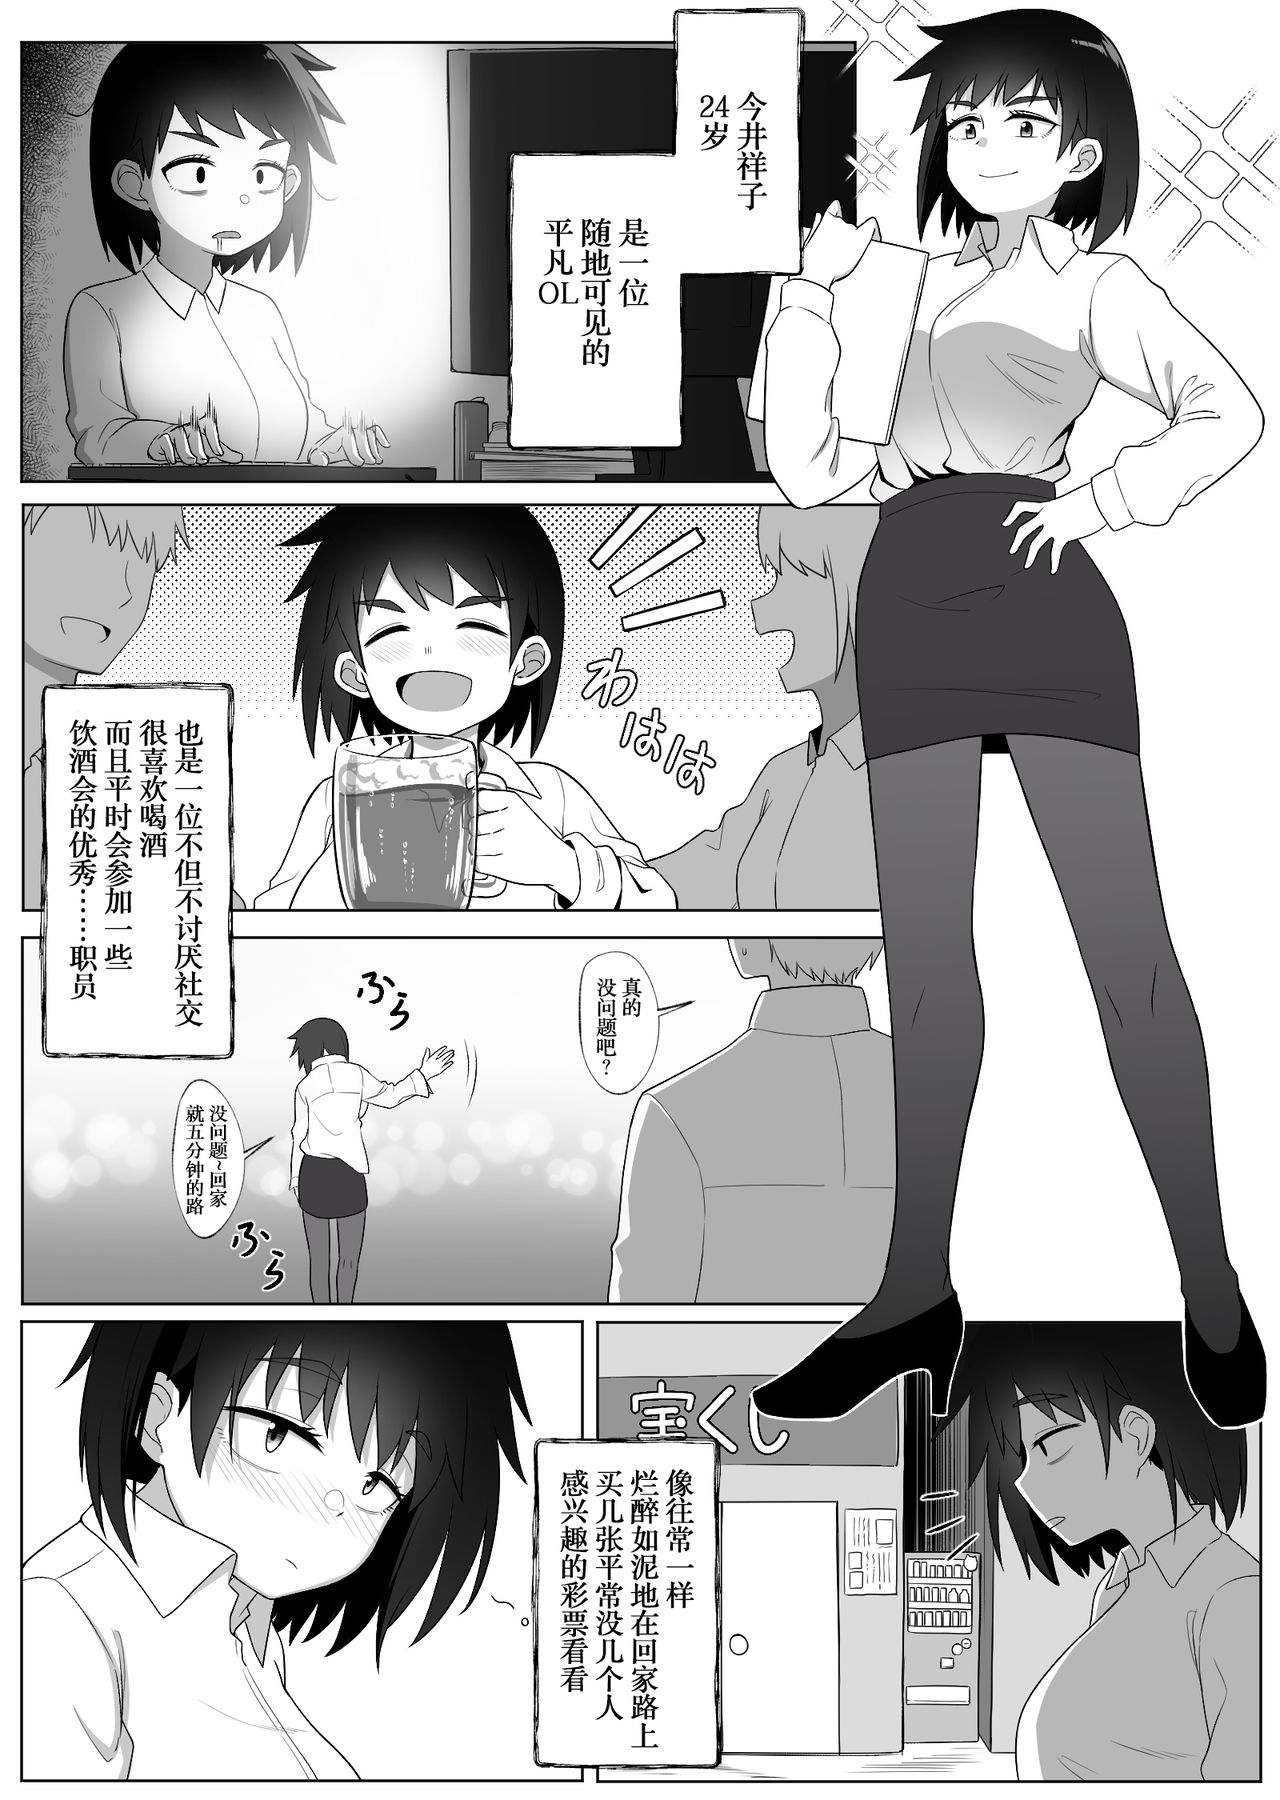 [Xion] Mirror Collection 2 [Chinese] [WTM直接汉化] 3